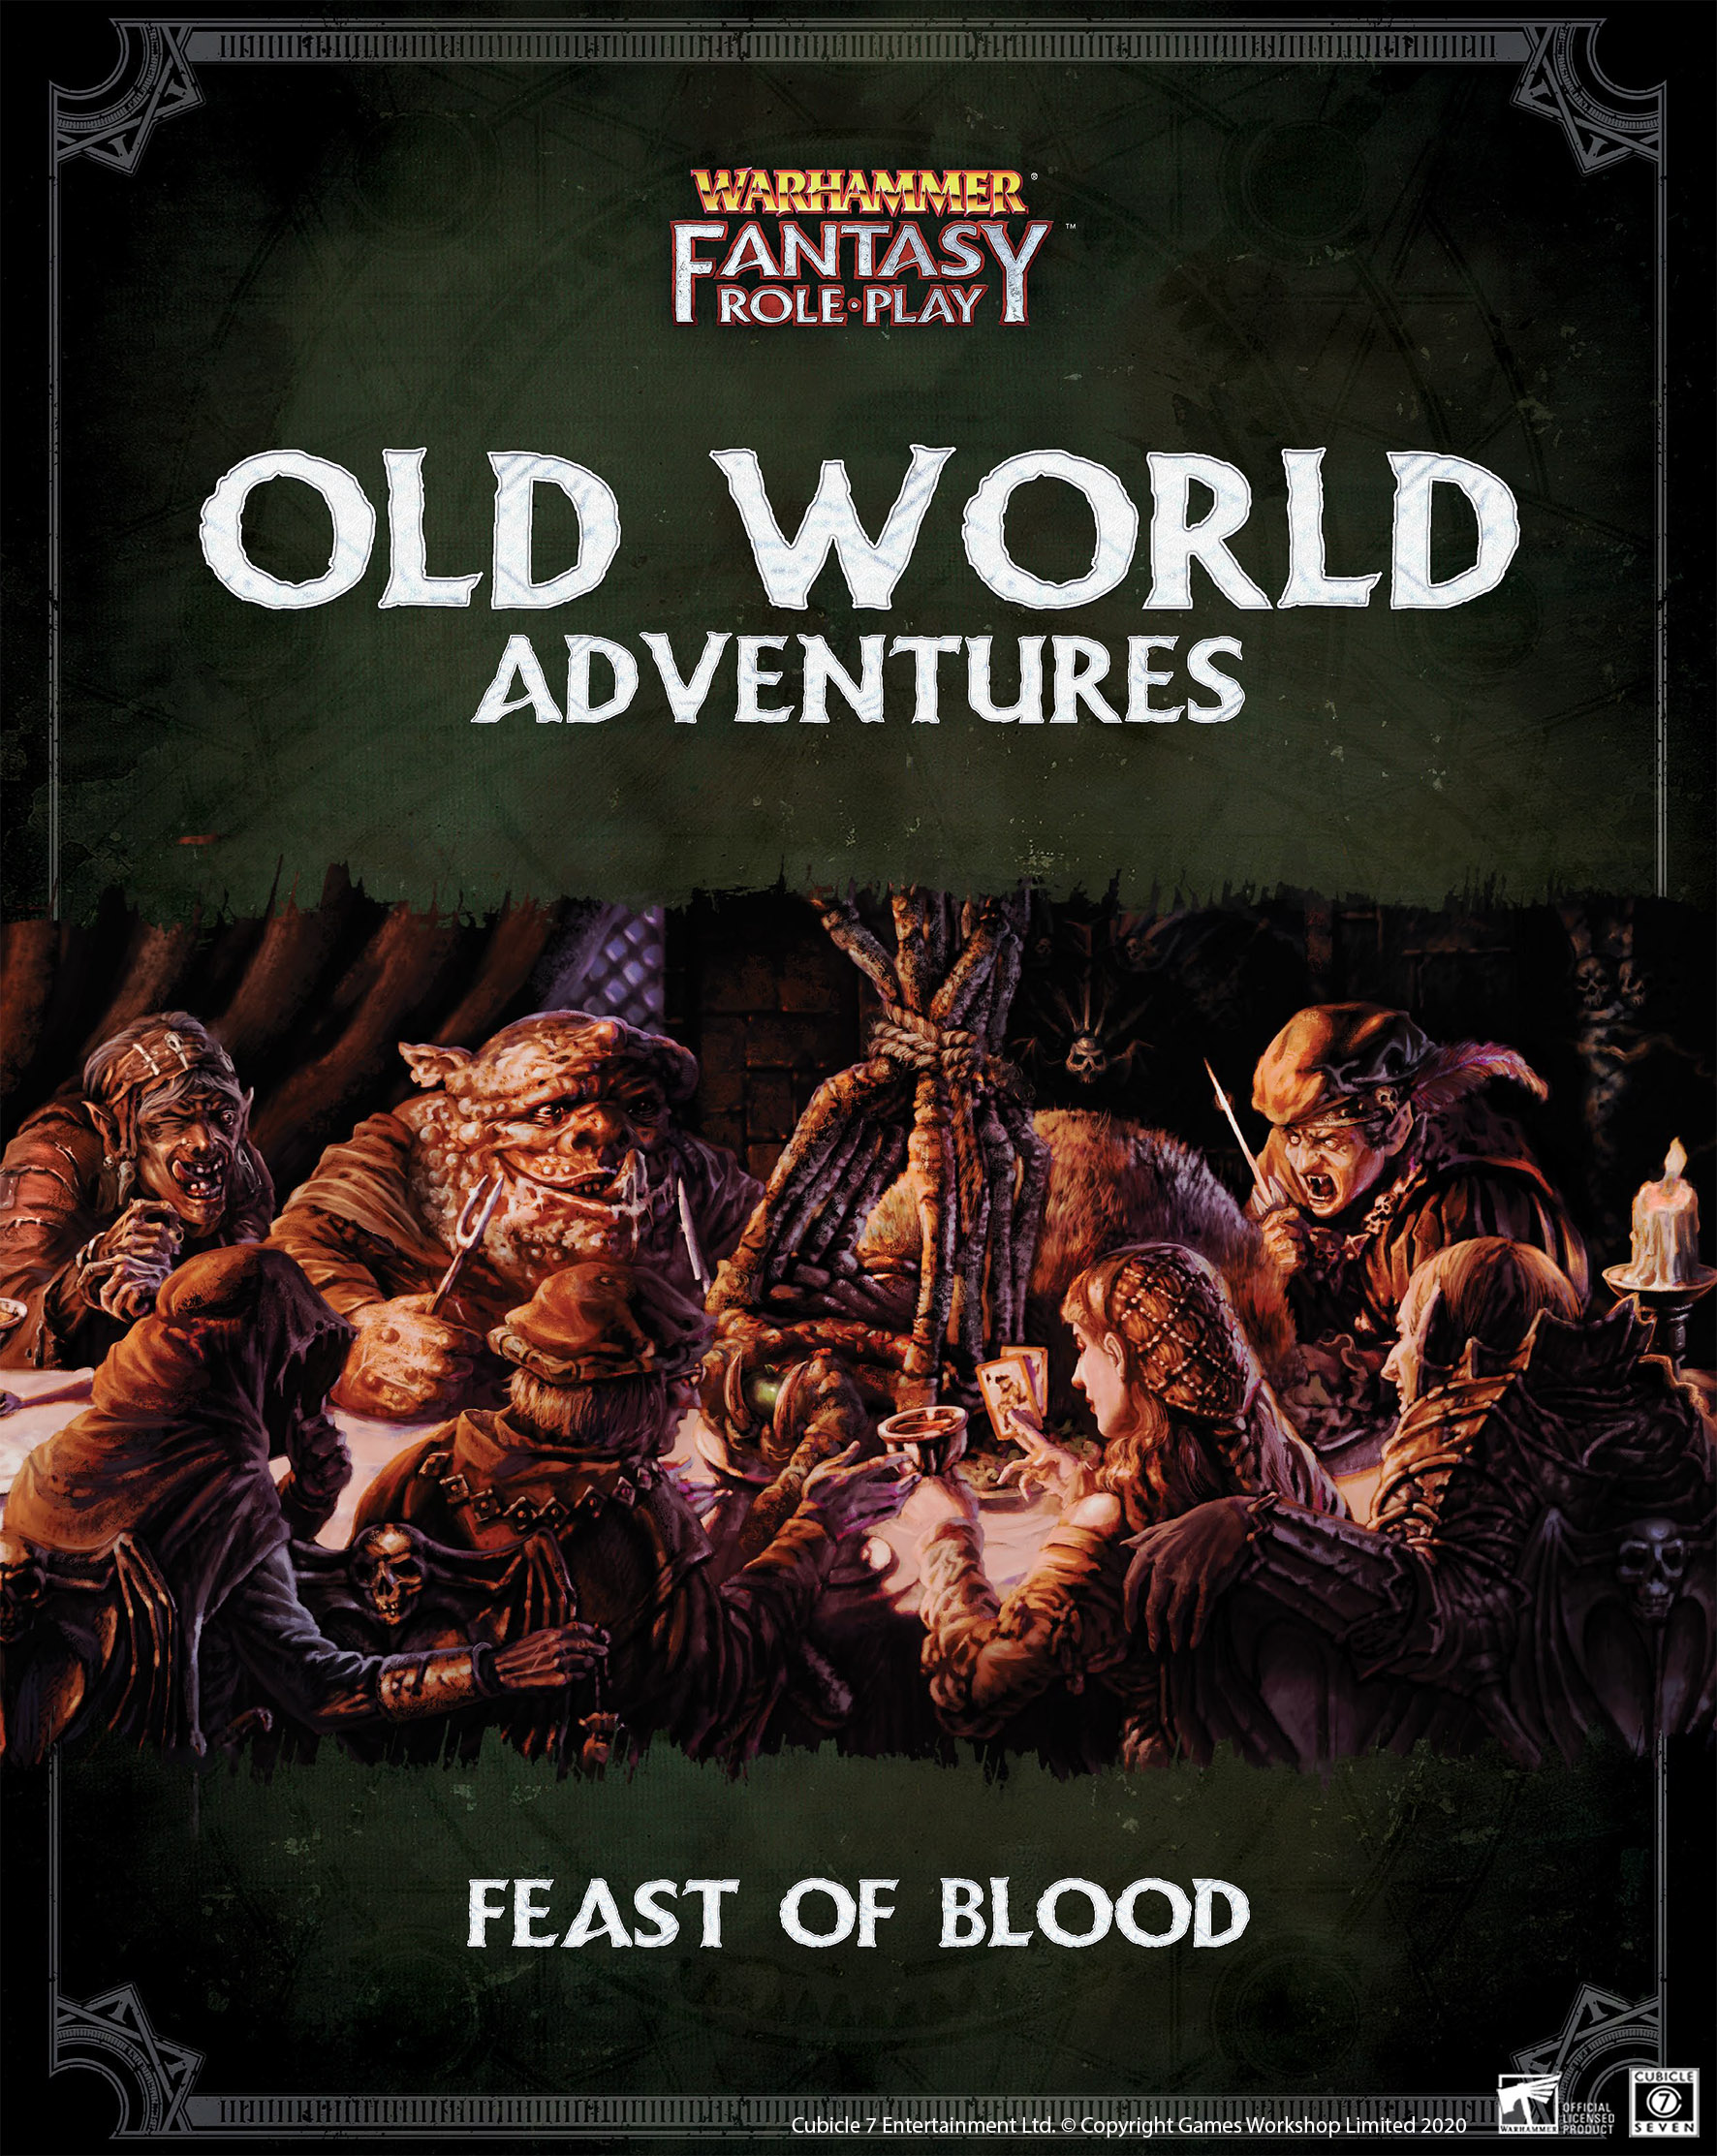 WFRP: New PDF Release -Feast of Blood